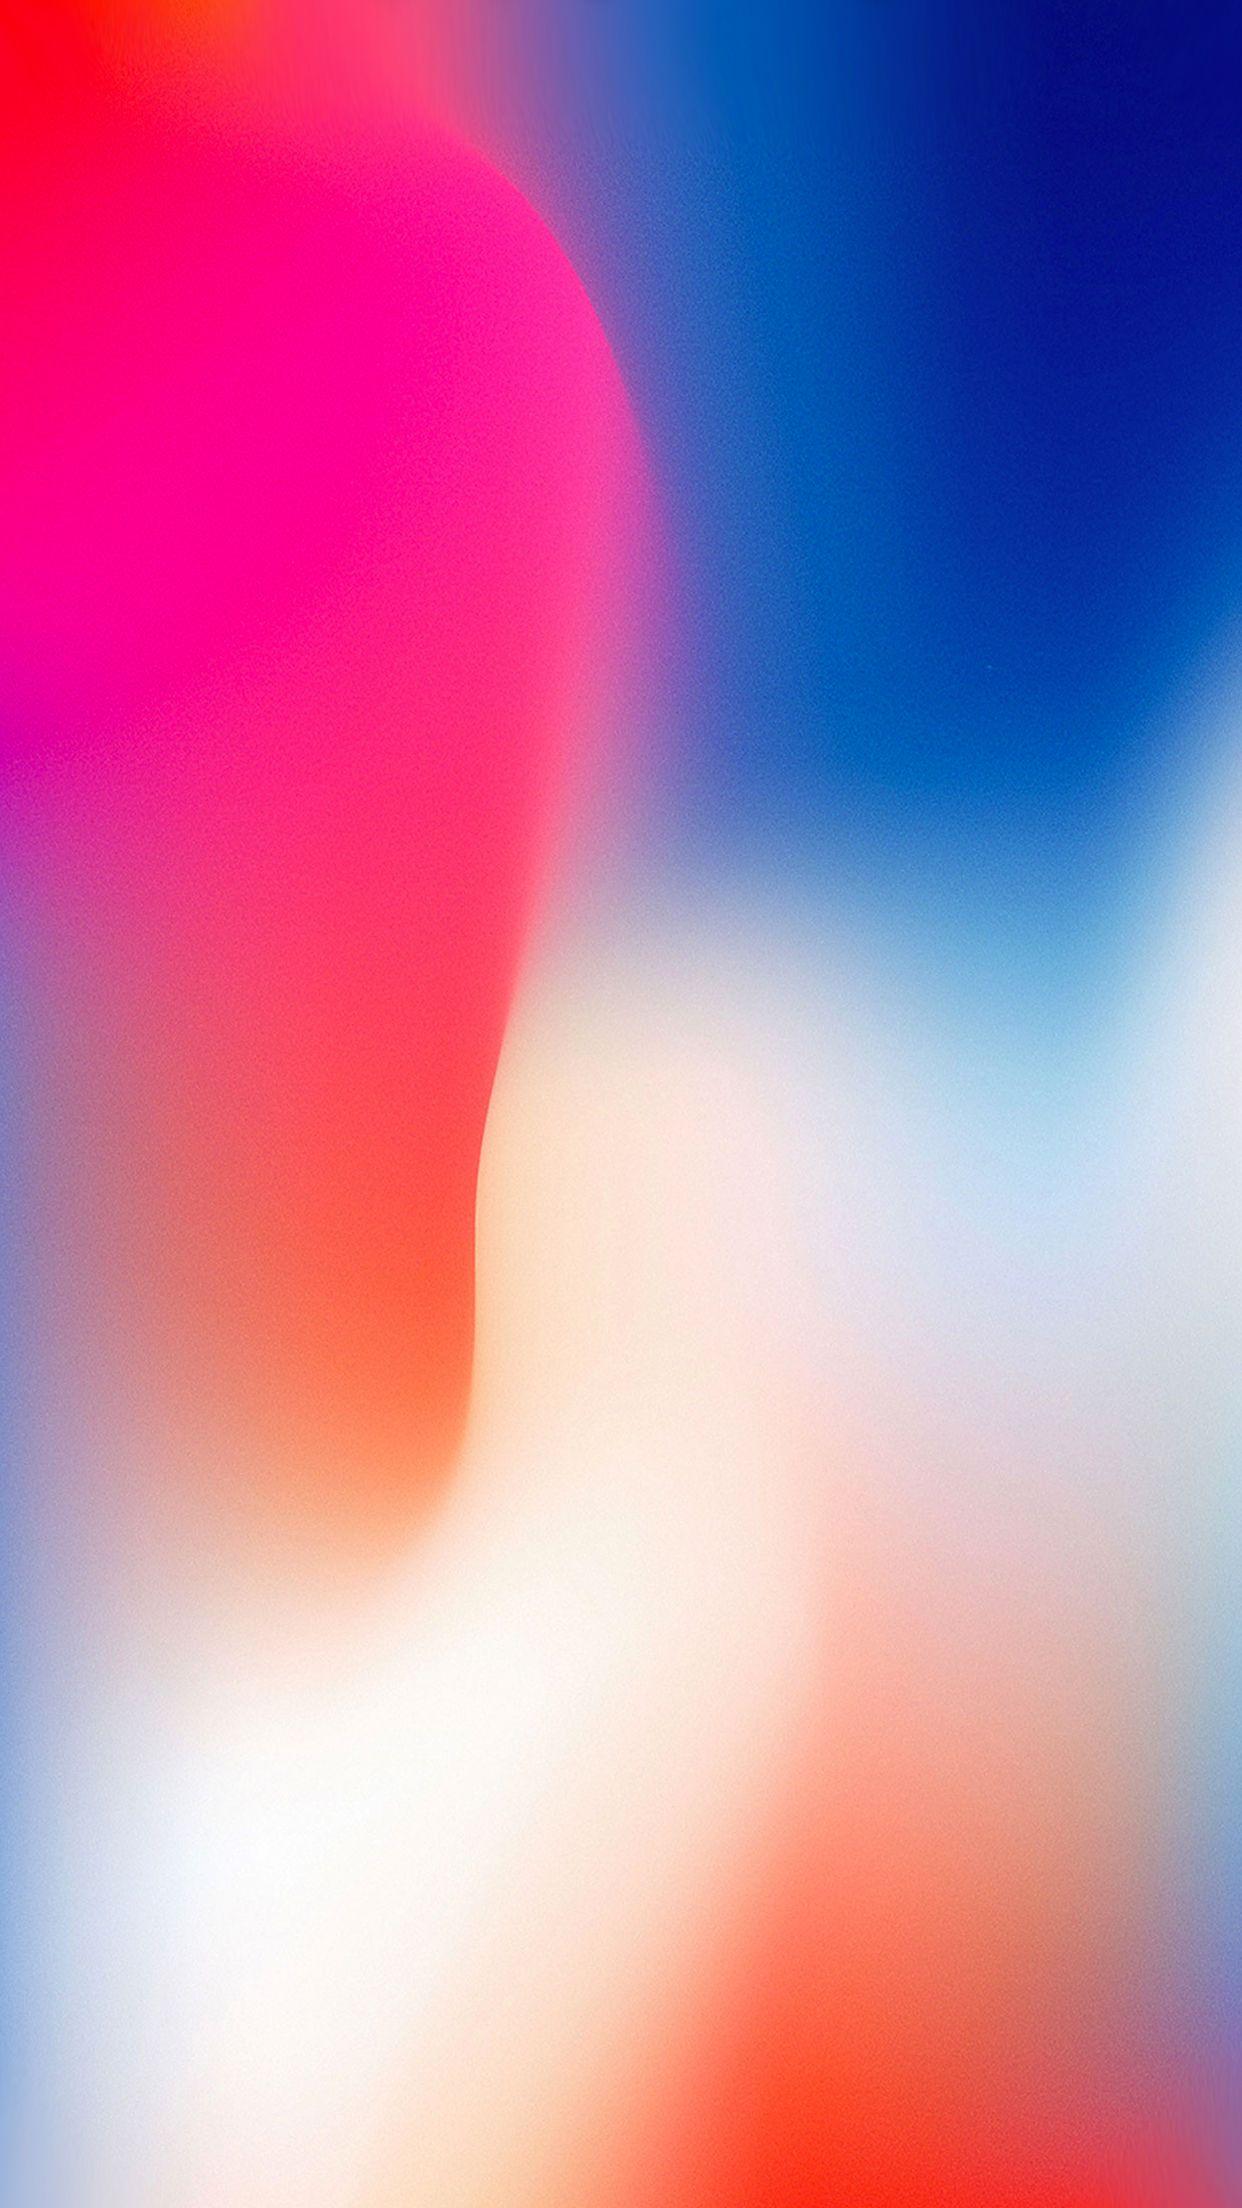 iPhone X Wallpapers for Download